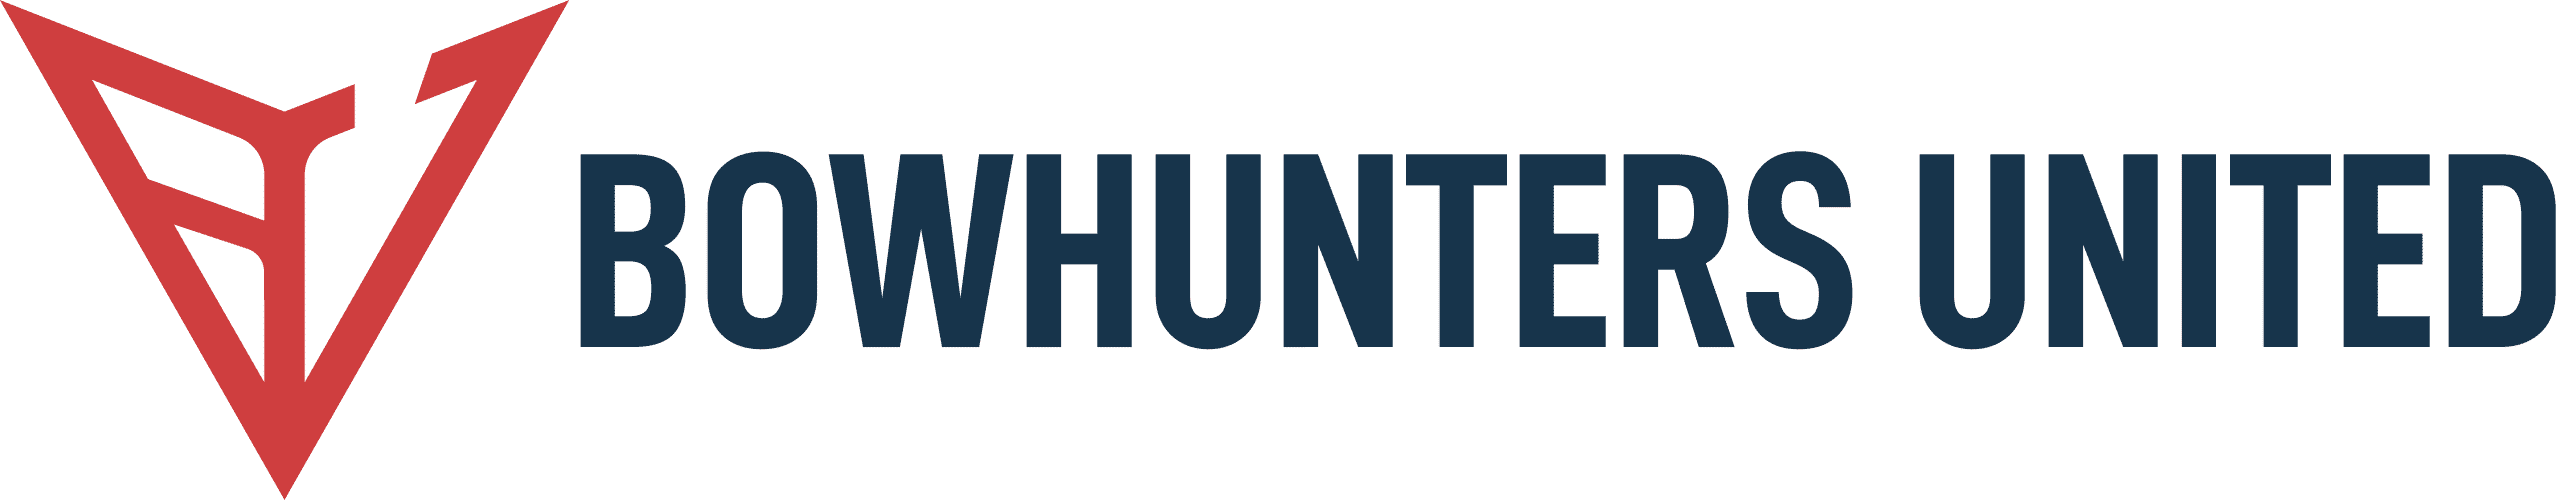 Bowhunters United